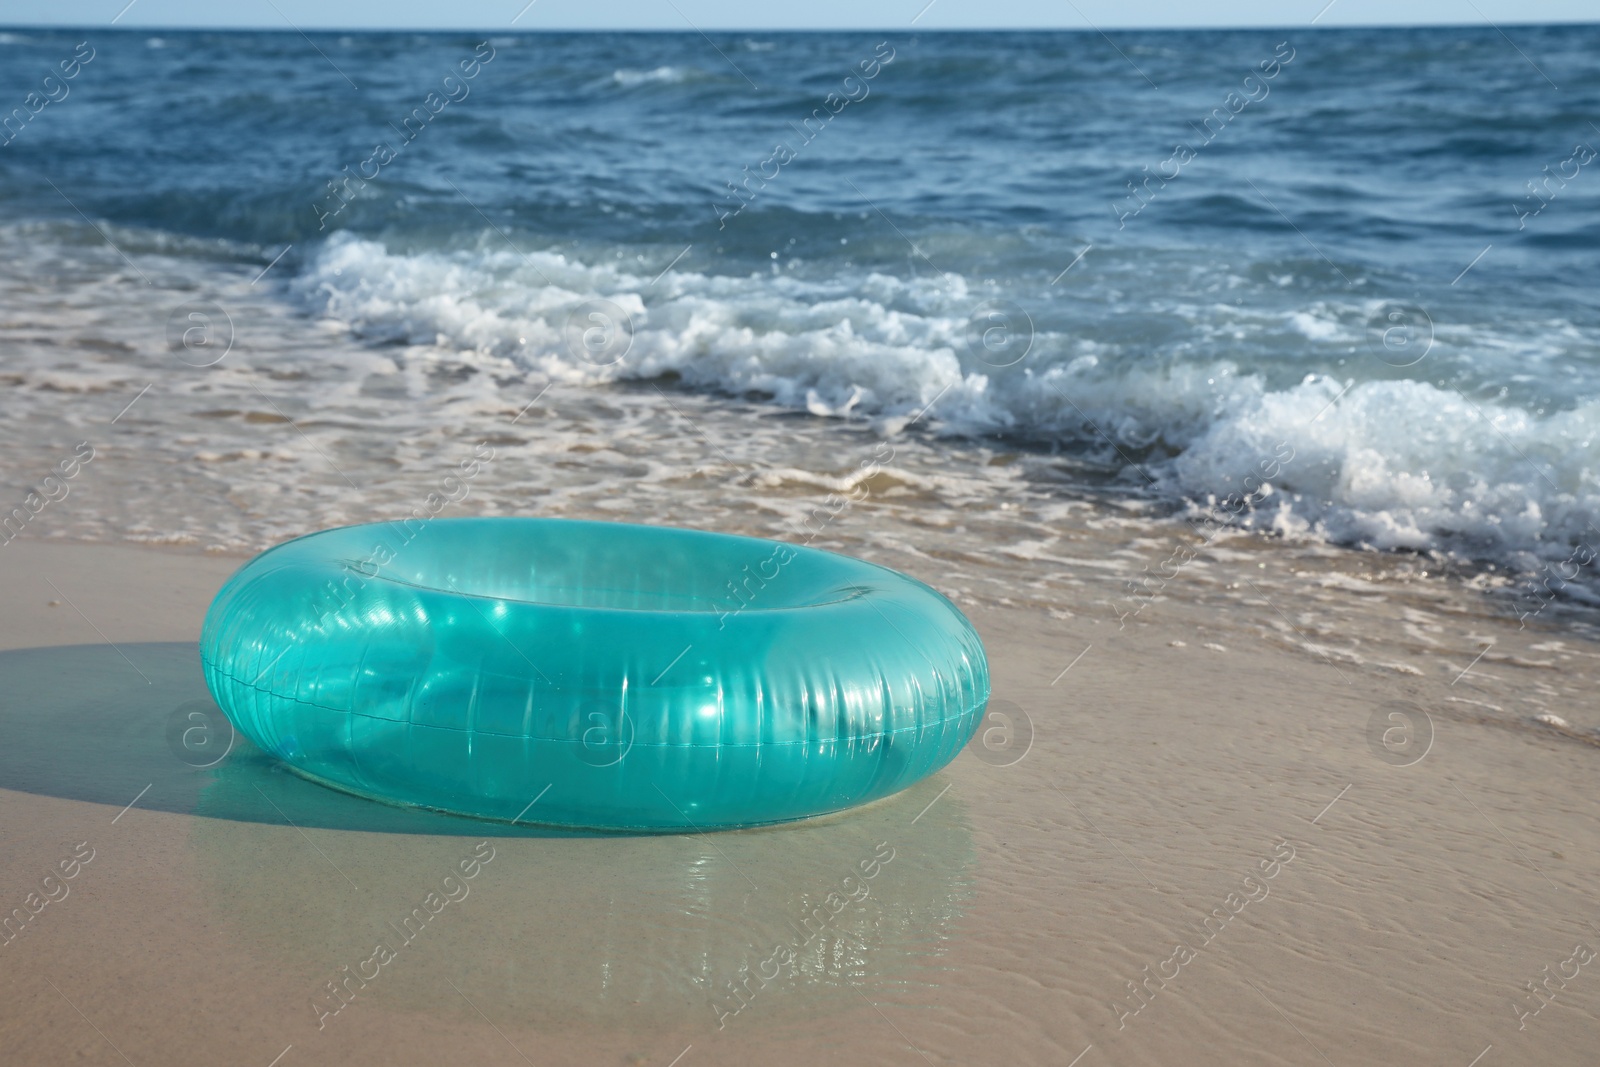 Photo of Bright inflatable ring on sandy beach near sea, space for text